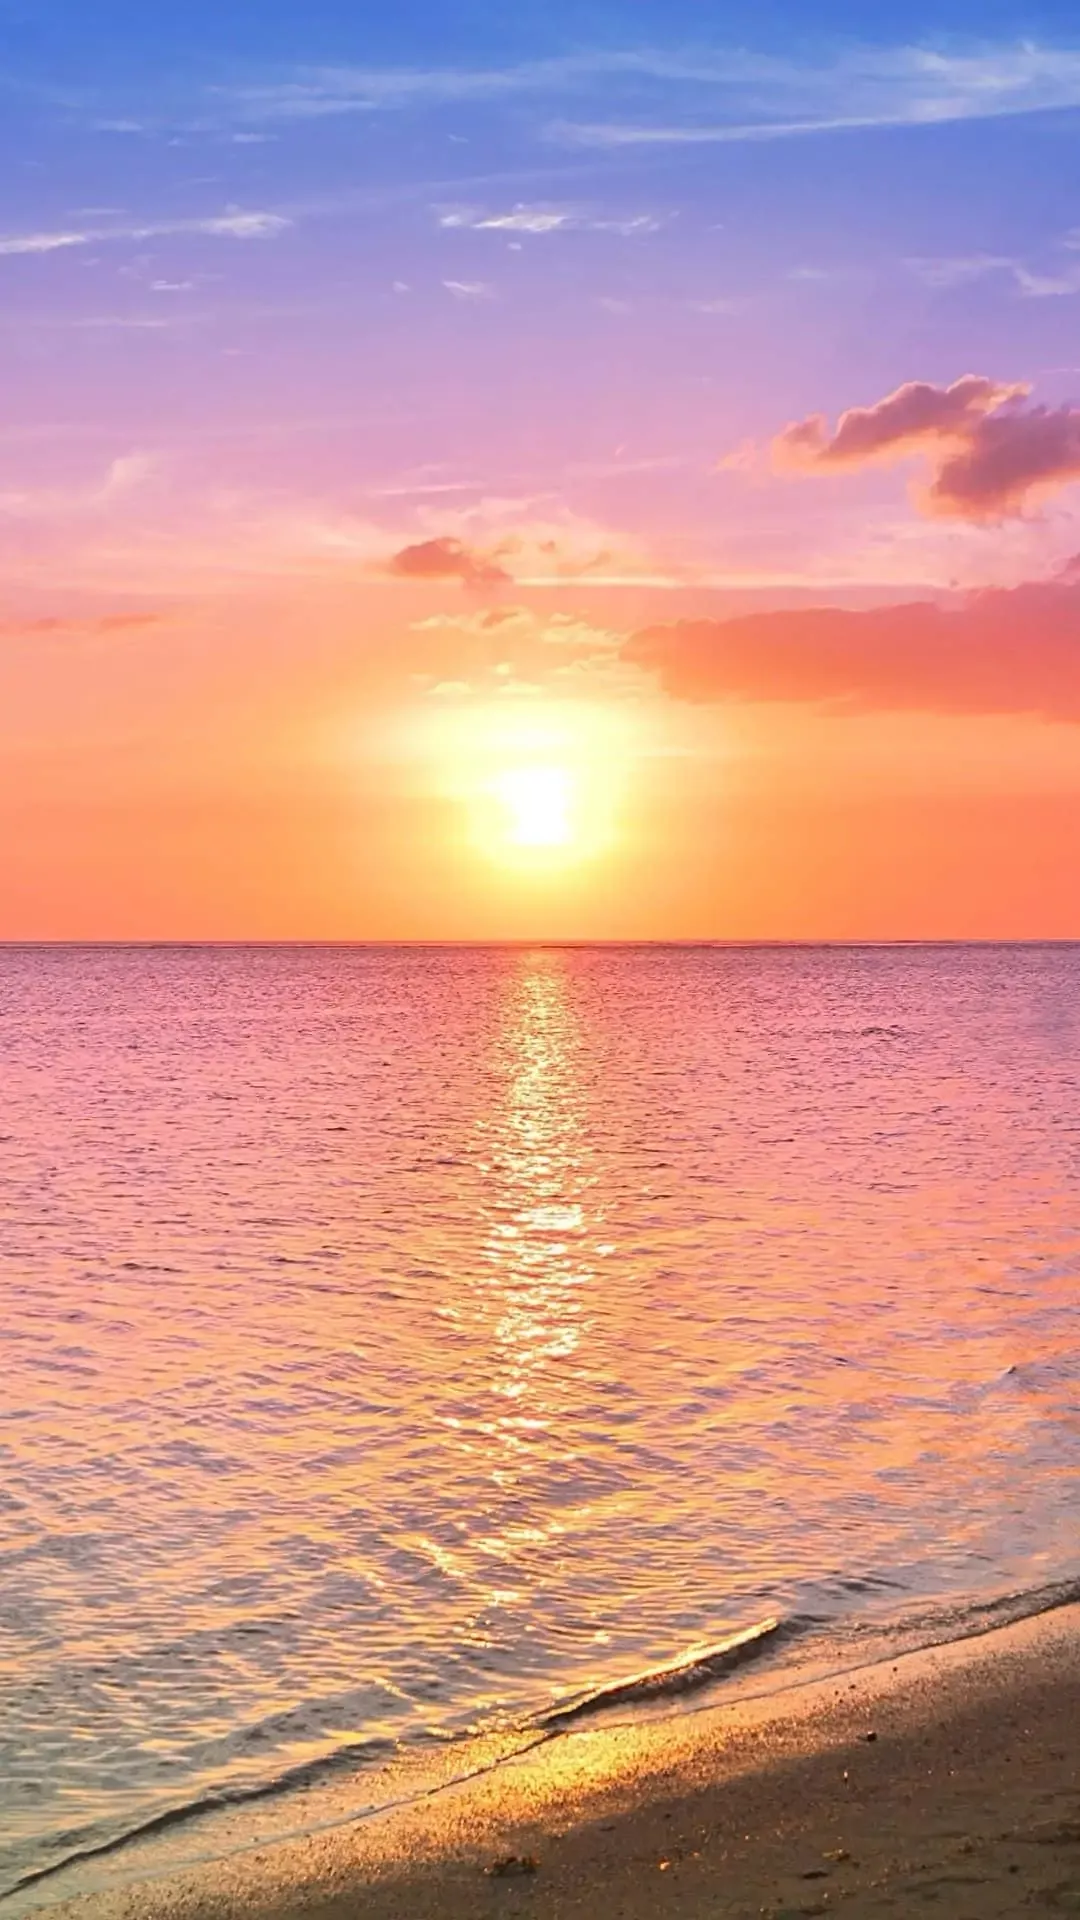 25 Sunset iPhone wallpaper | Sunset iPhone background - Be Centsational